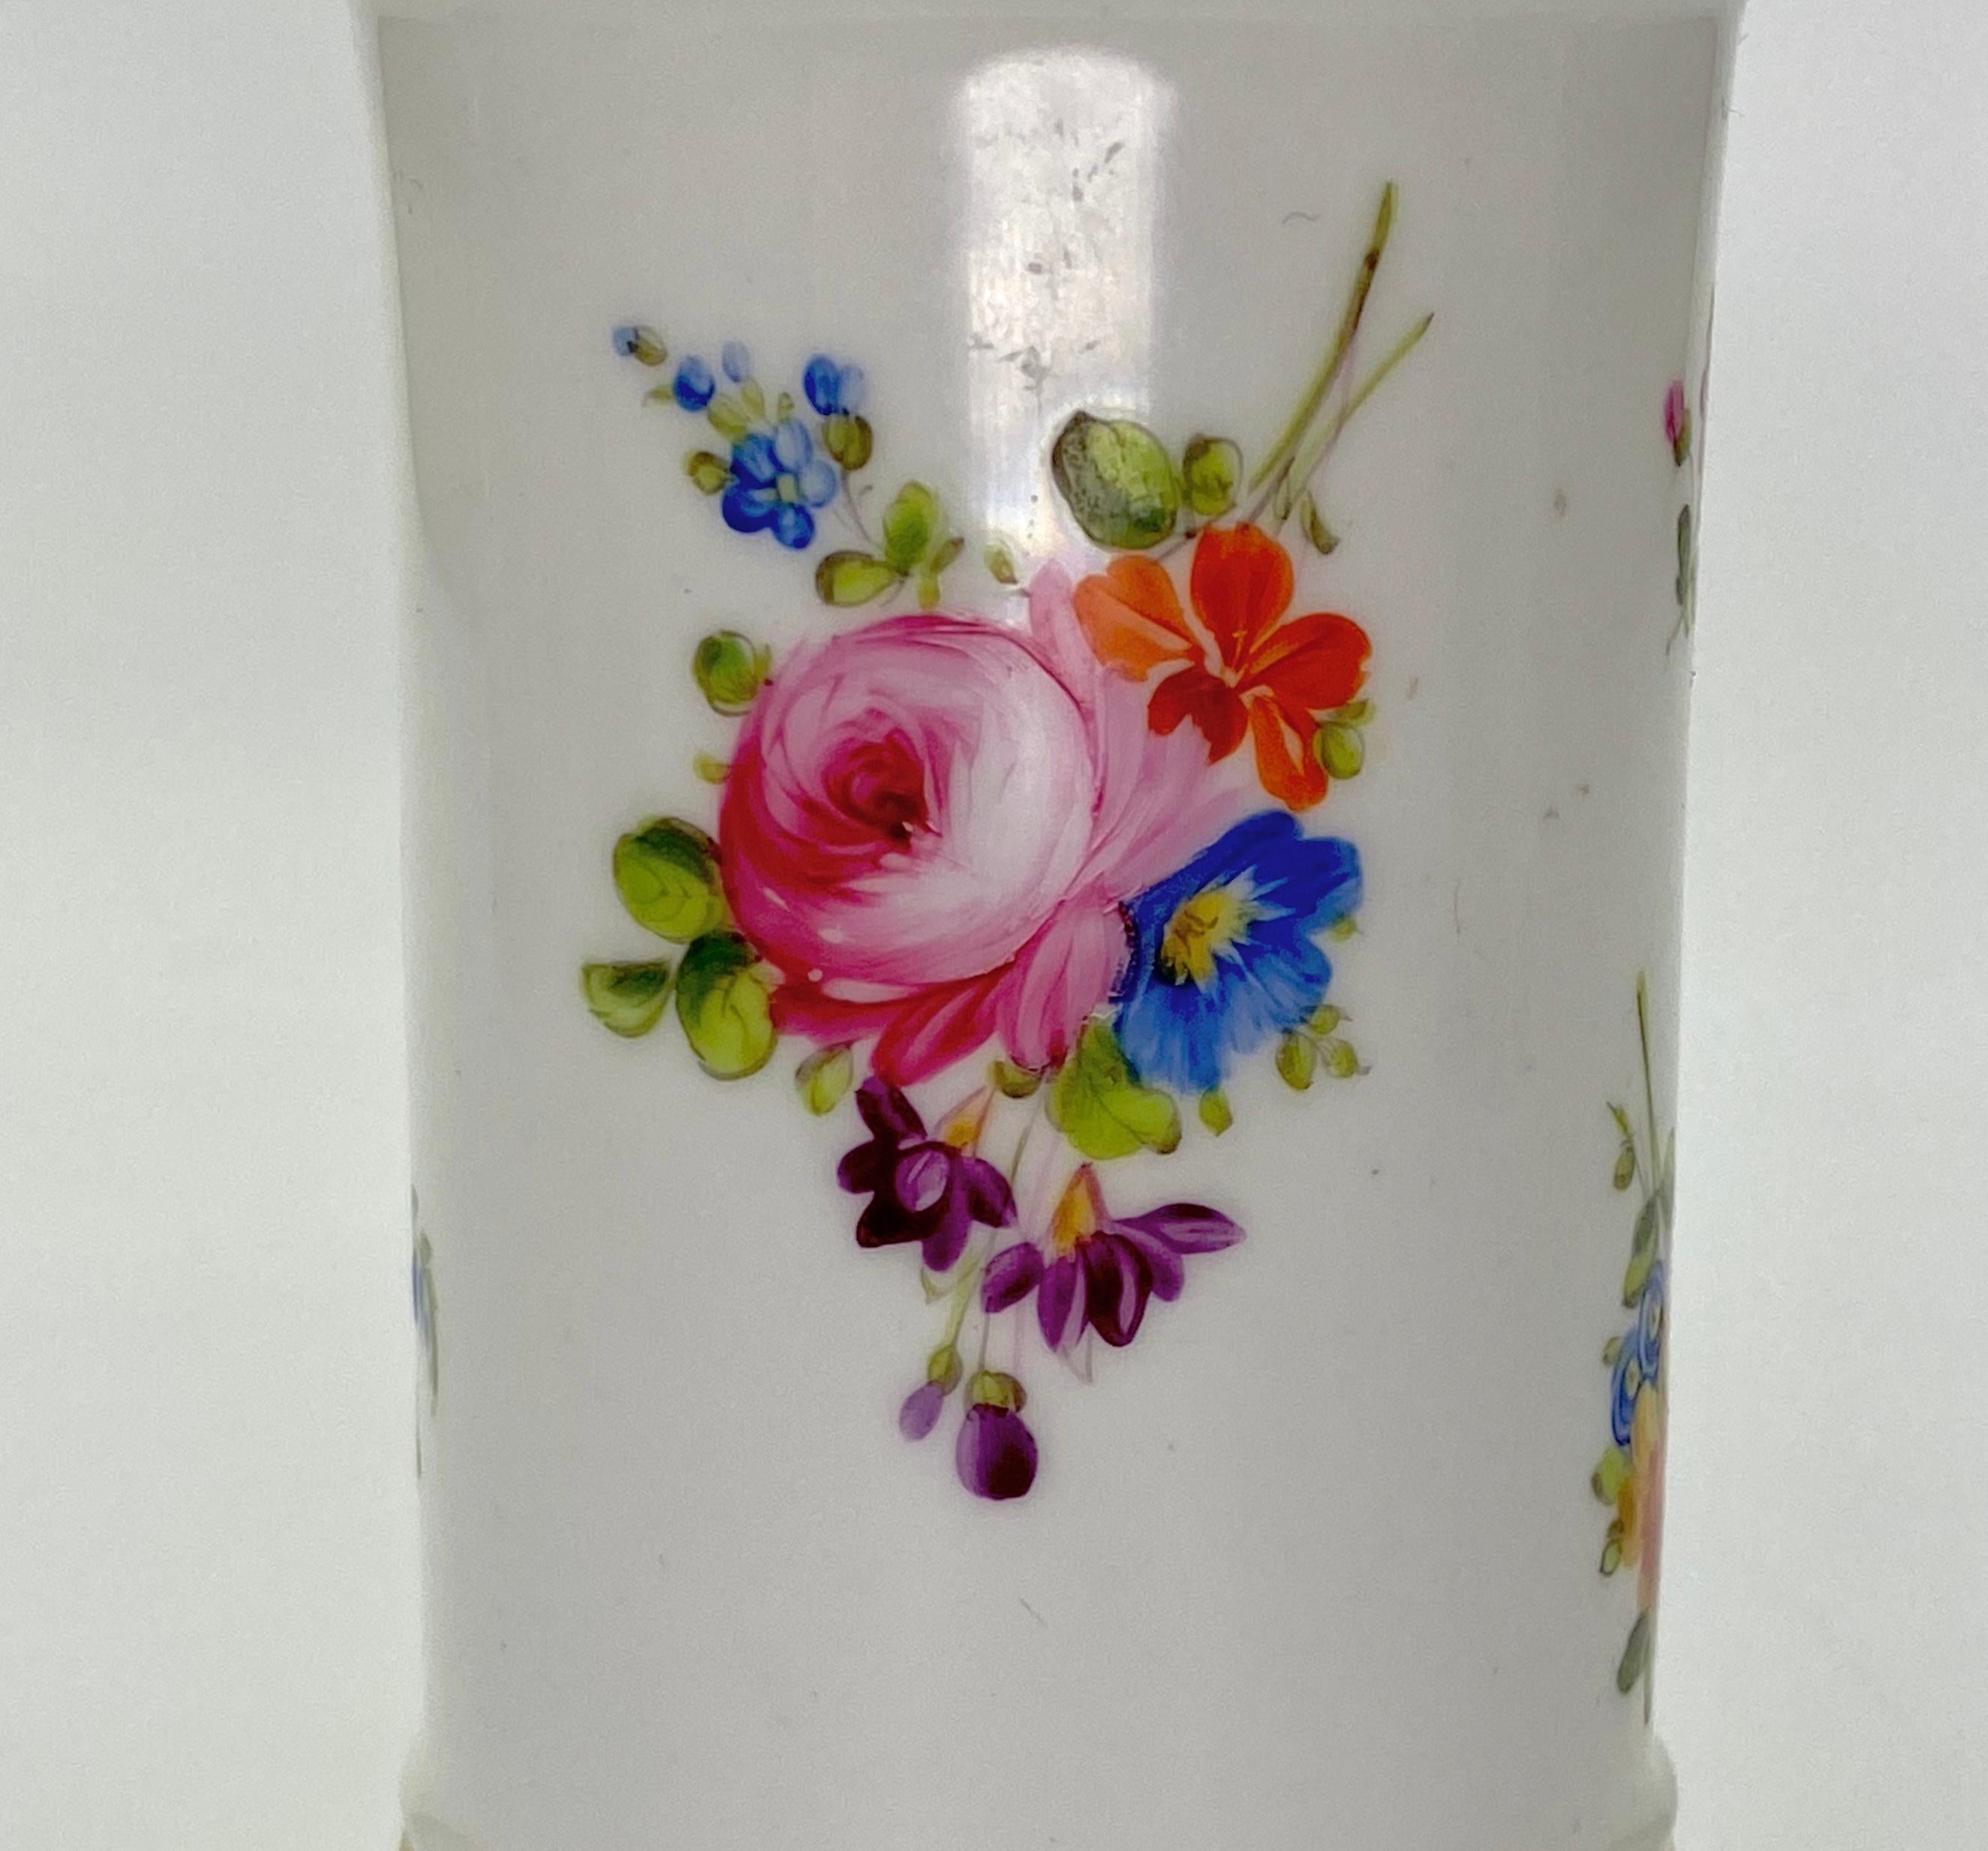 Swansea porcelain spill vase, circa 1815. The cylindrical vase, painted with large sprays of flowers, interspersed with smaller sprigs. The rim decorated with a gilt dentil motif.
Set upon a spreading circular pedestal foot.
Medium: